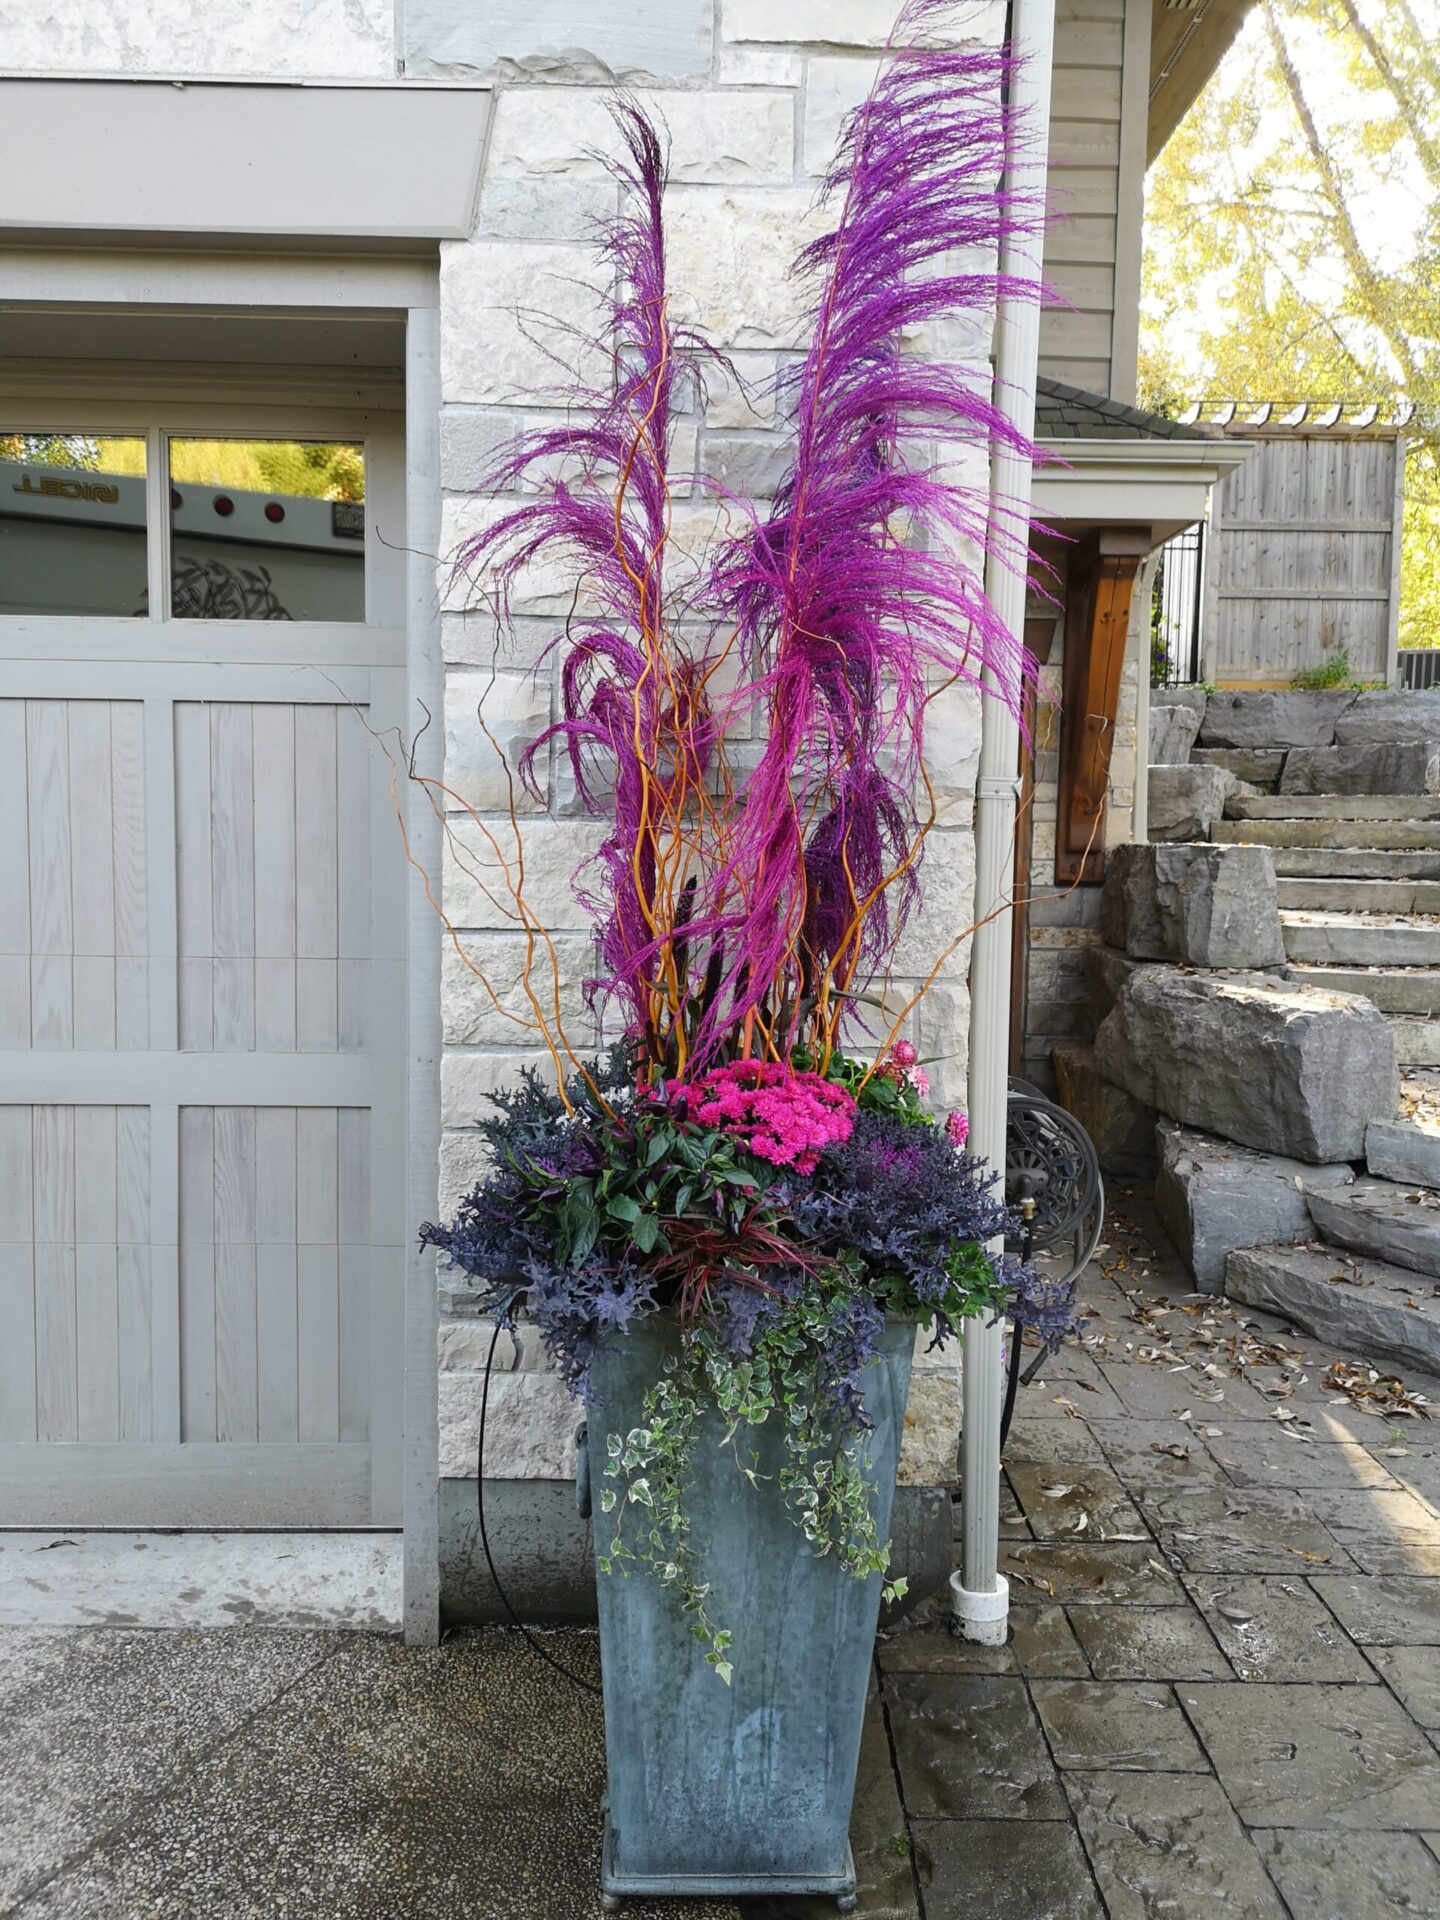 A large decorative planter with vibrant purple and pink flowers, feathery plumes, and trailing greenery placed beside a stone house entrance.